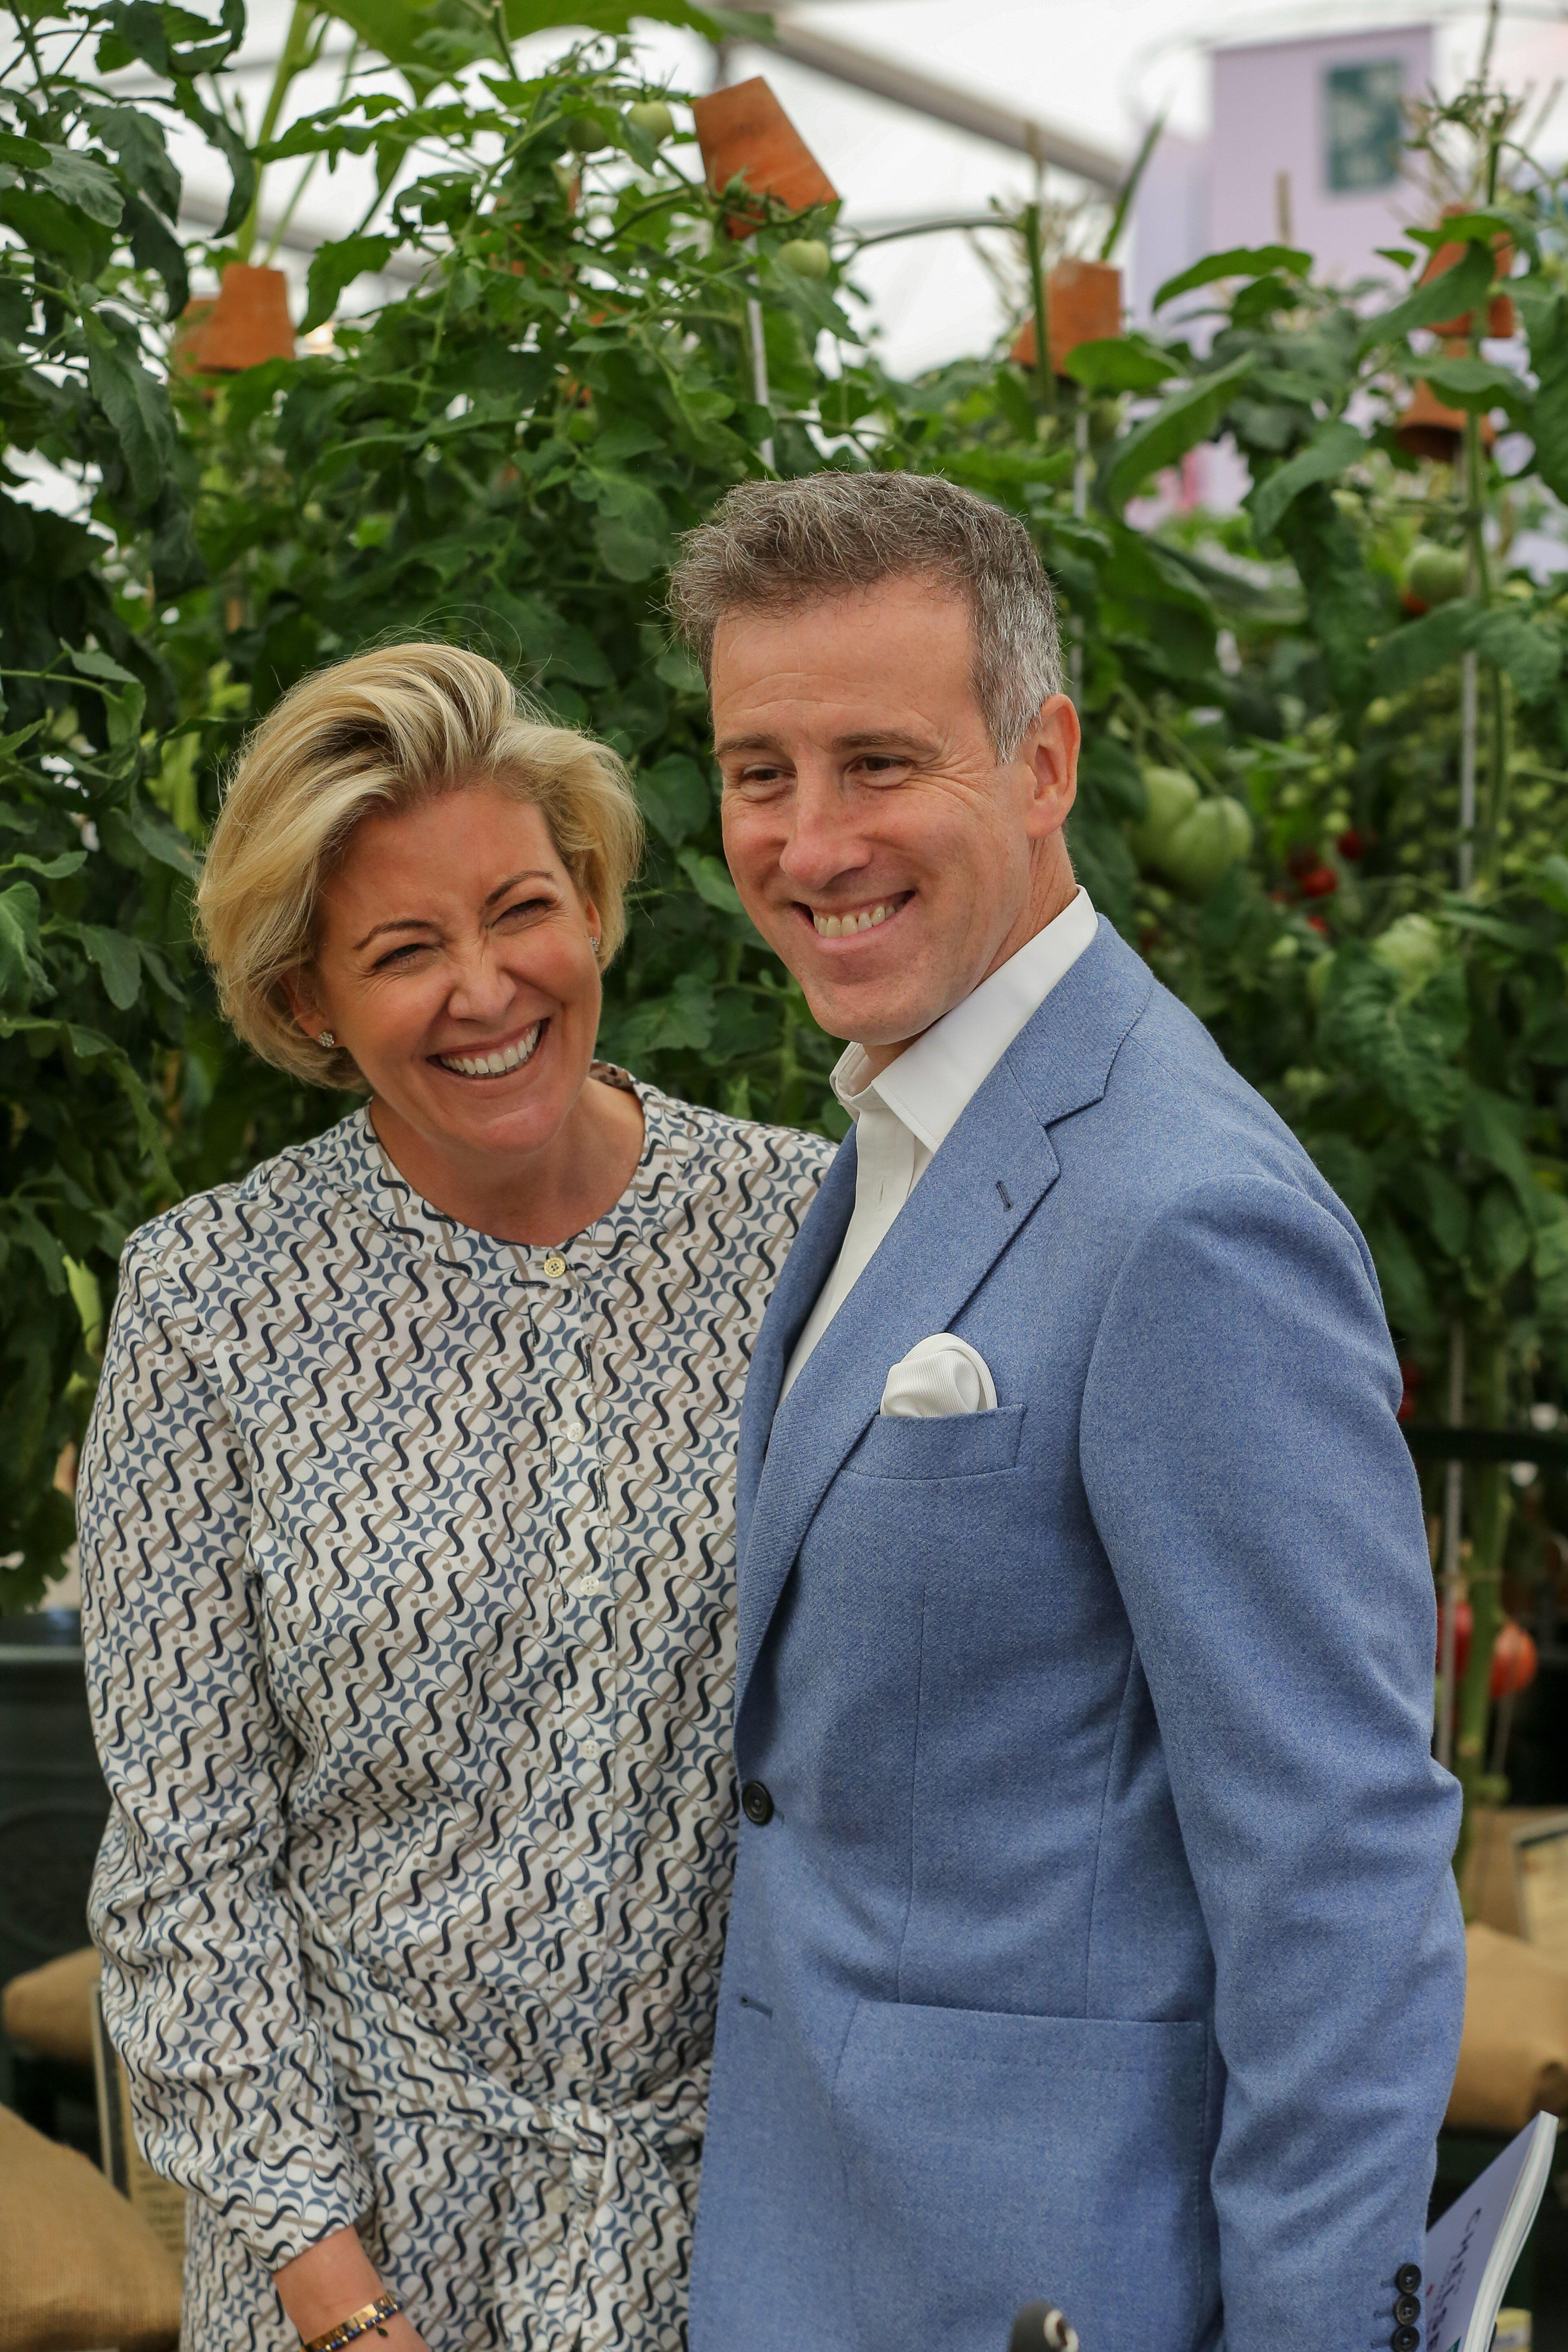 Anton Du Beke and his wife Hannah at this year's RHS Chelsea Flower Show (Alamy/PA)